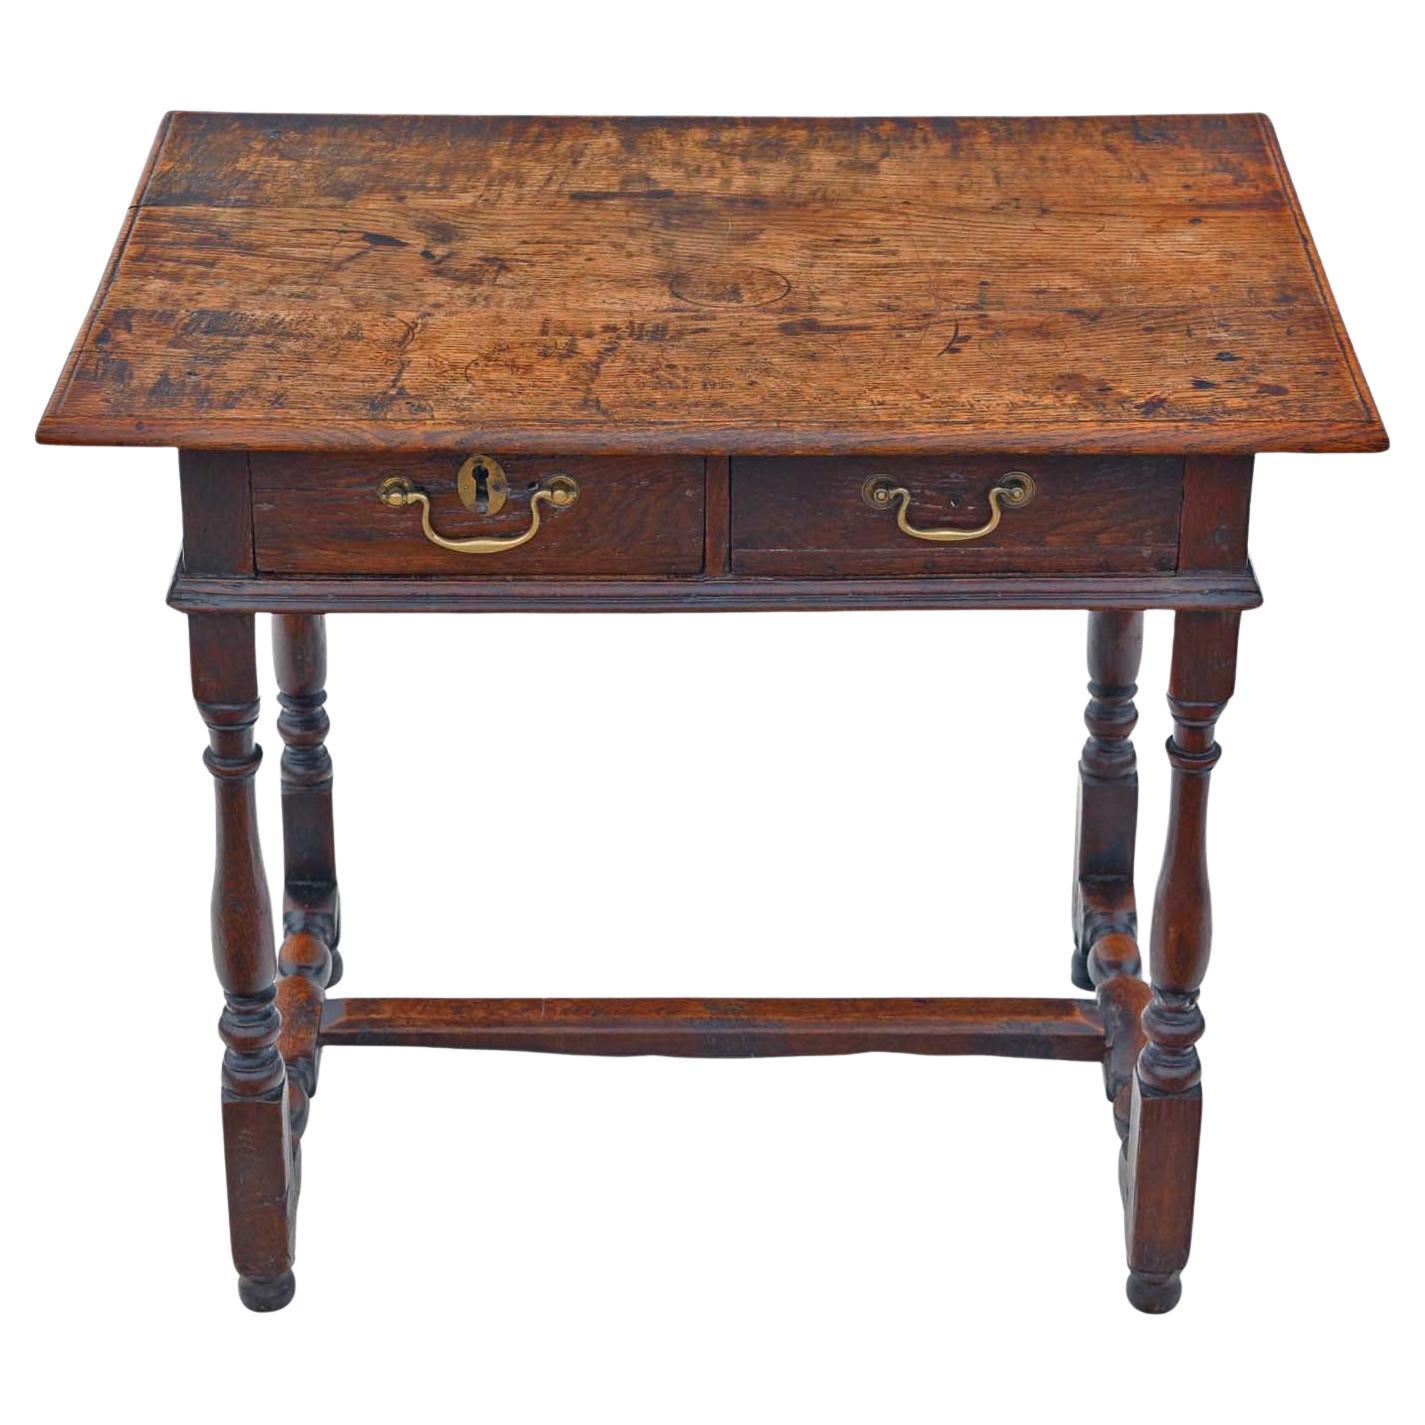 High-Quality Antique Oak Writing Table - Early 18th Century Desk Side Dressing